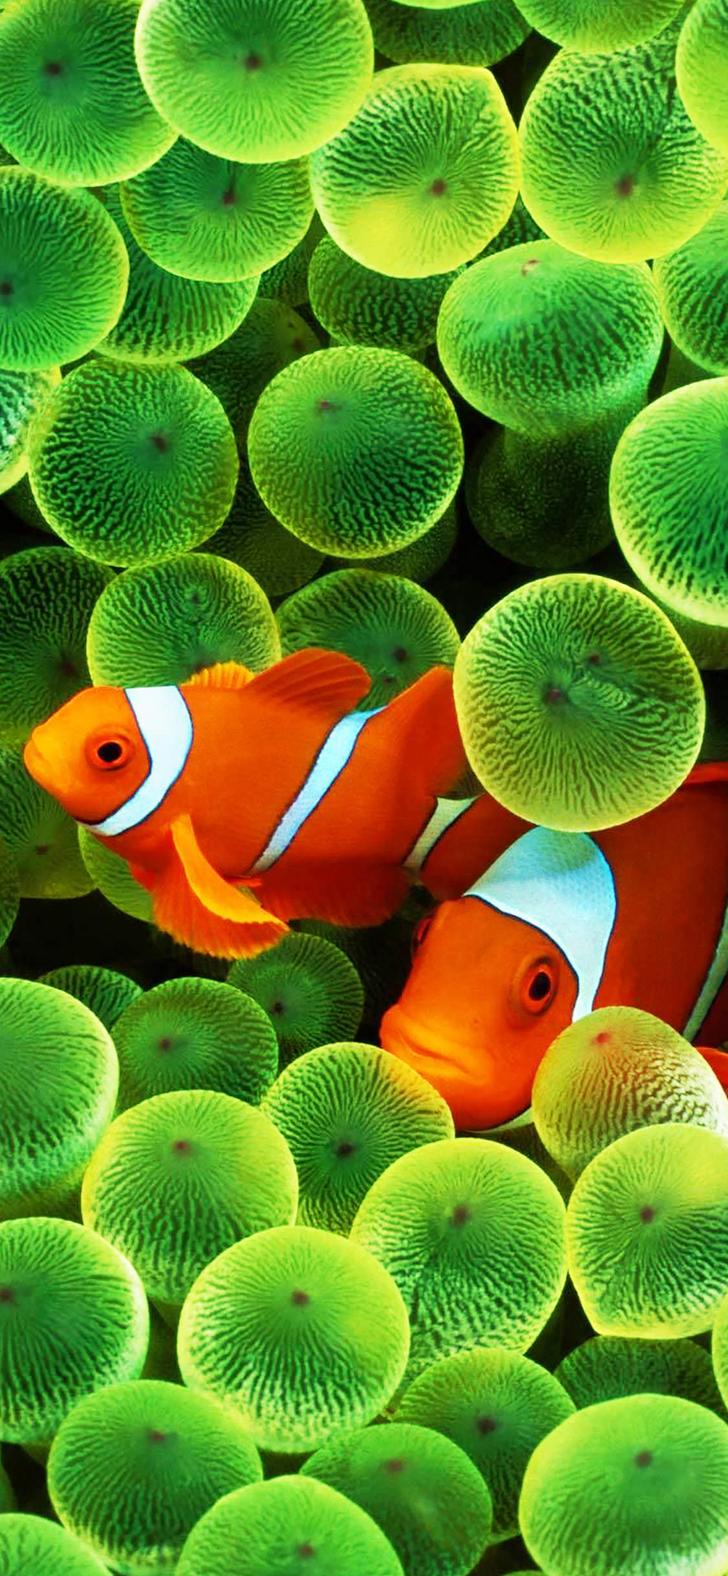 Clown fish iphone wallpapers